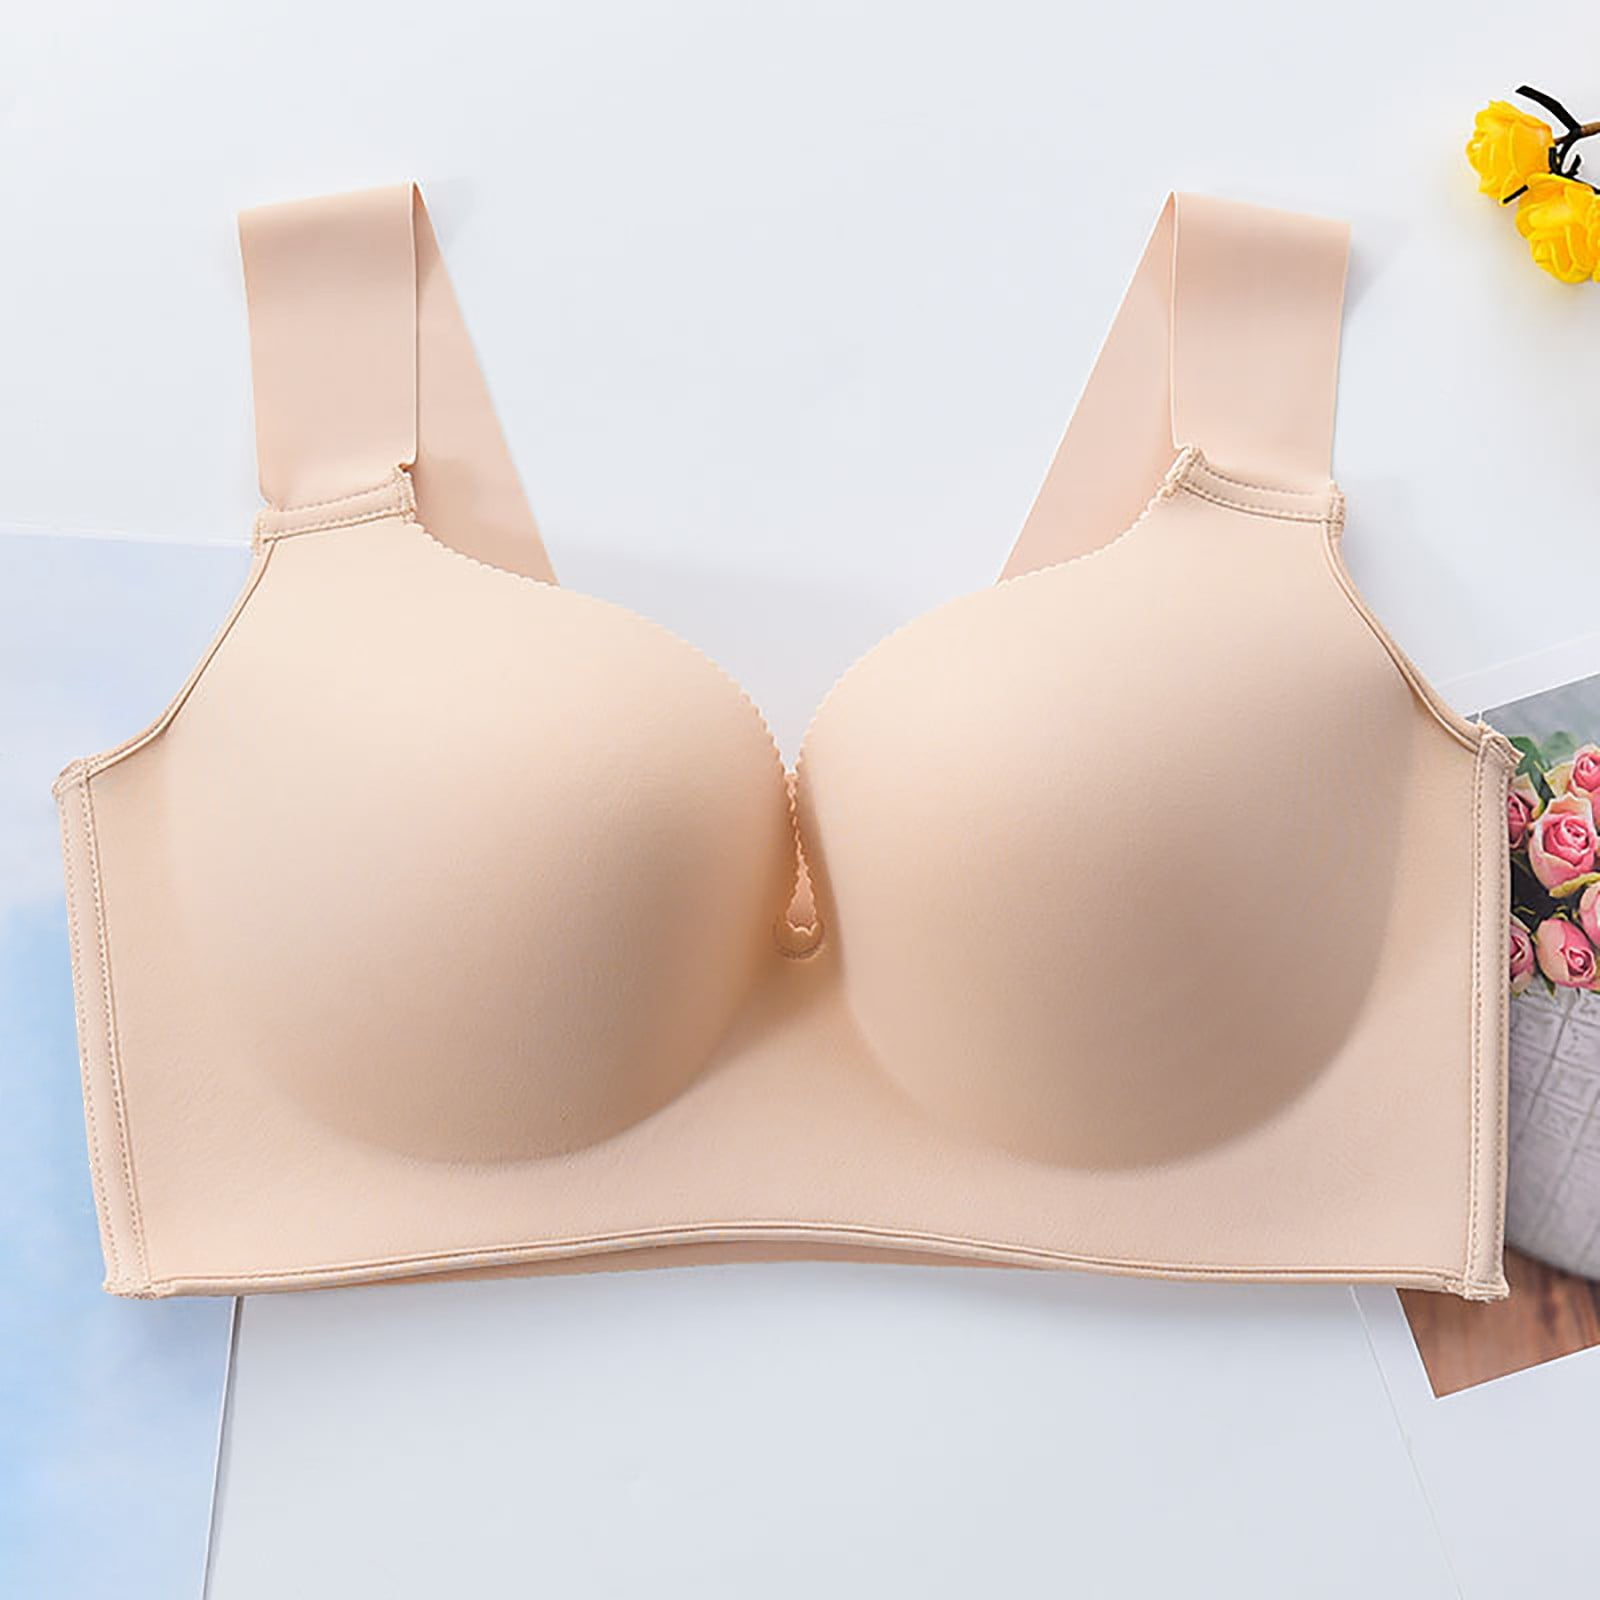 Stamzod Female Bra Push Up Wireless Adjustable Bra For Women Sexy Full Cup  Lingerie Underwear Plus Size Cover Cup Breast Wide Straps Bra 